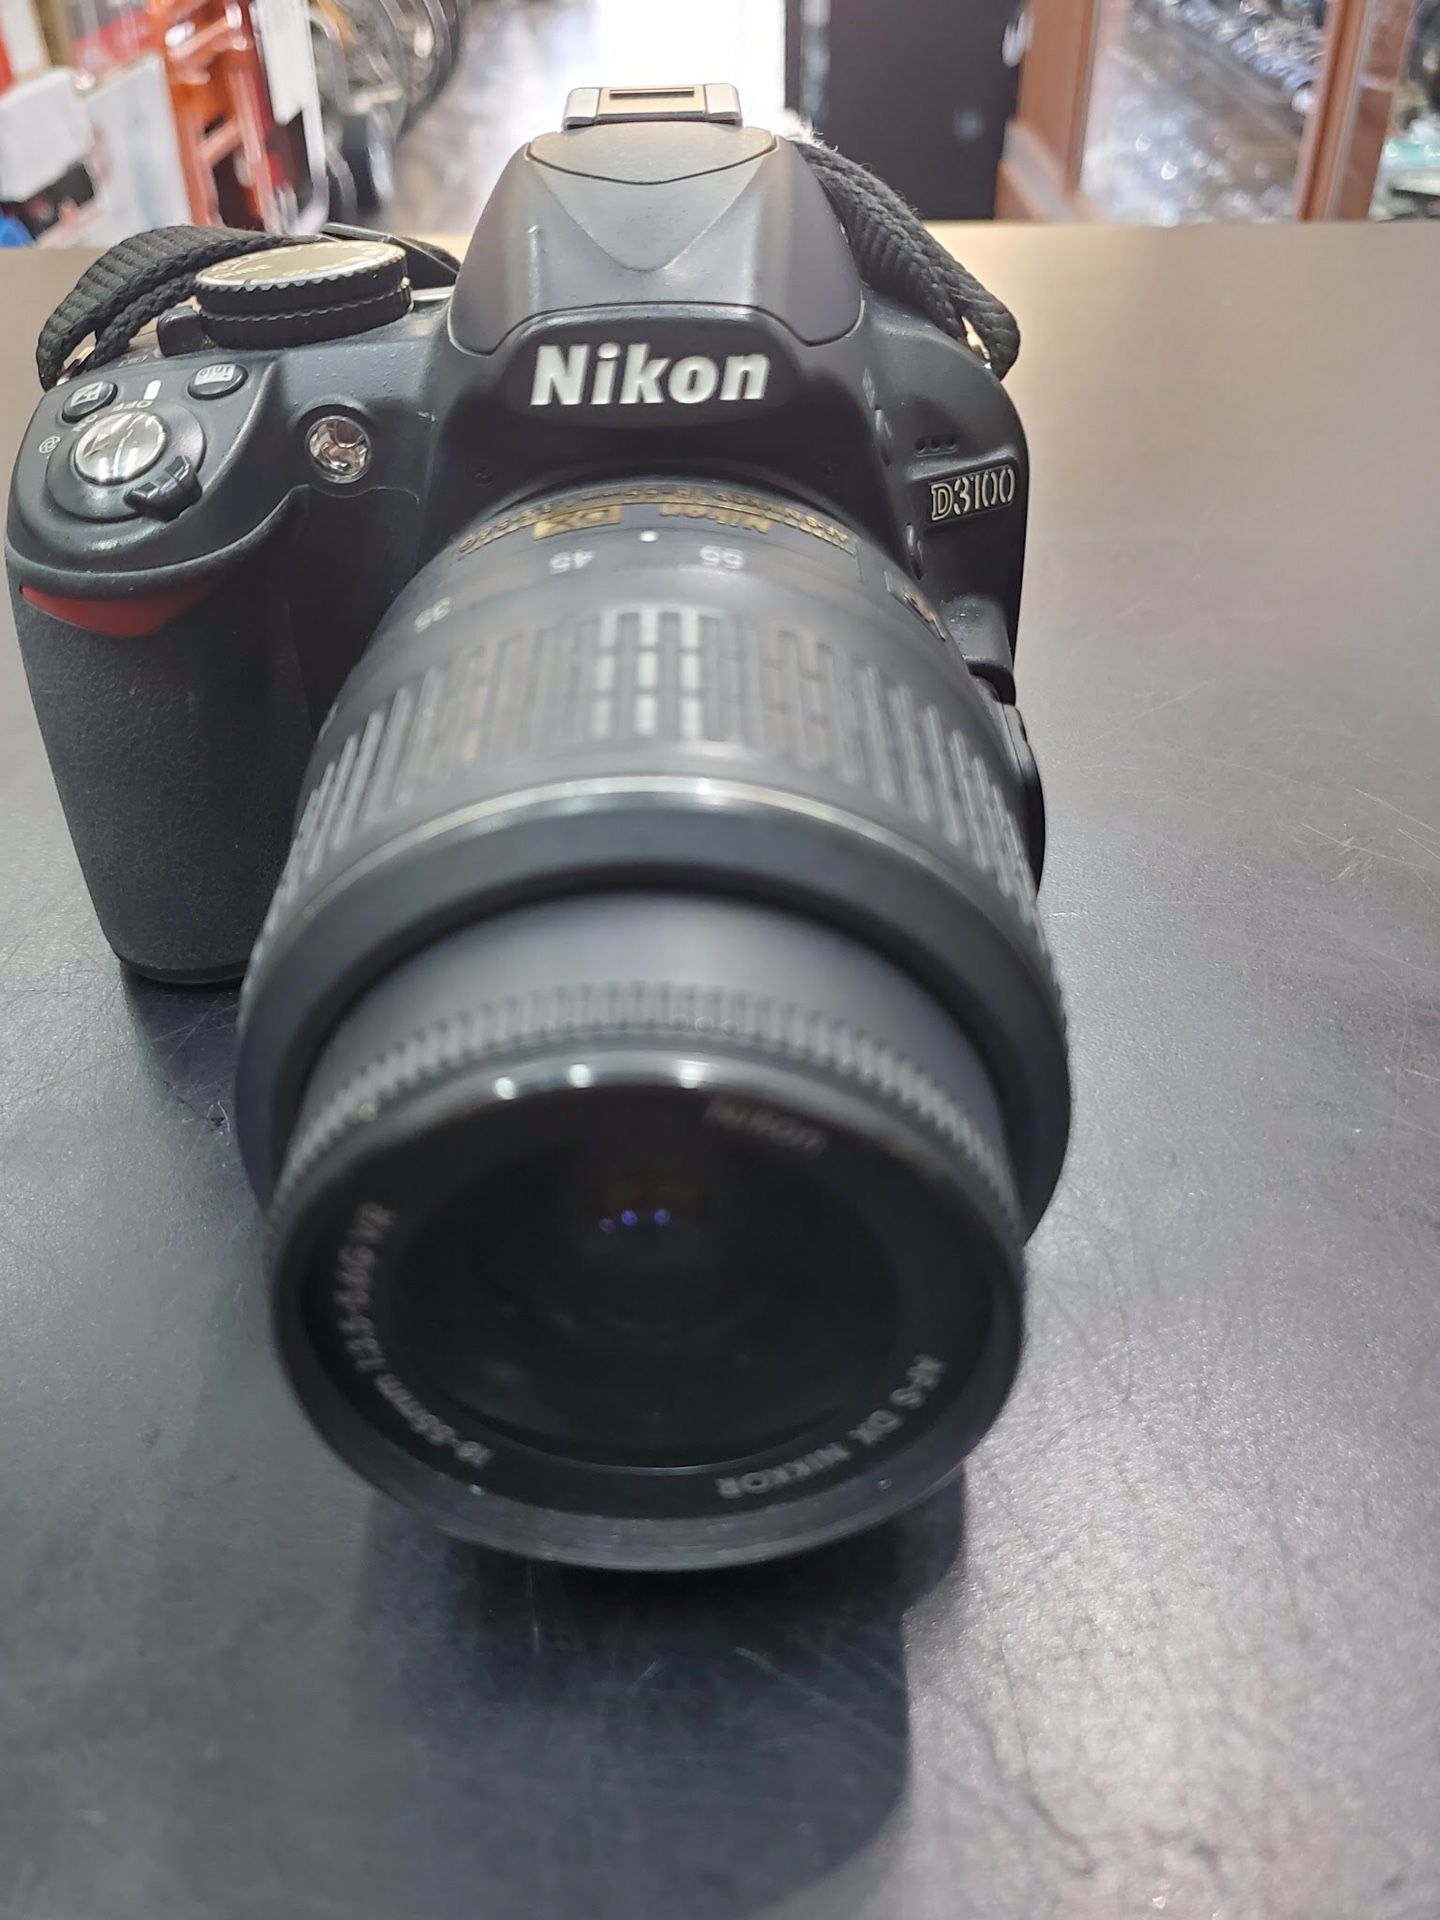 Nikon D3100 Digital Camera with 18-55mm Lens and Charger